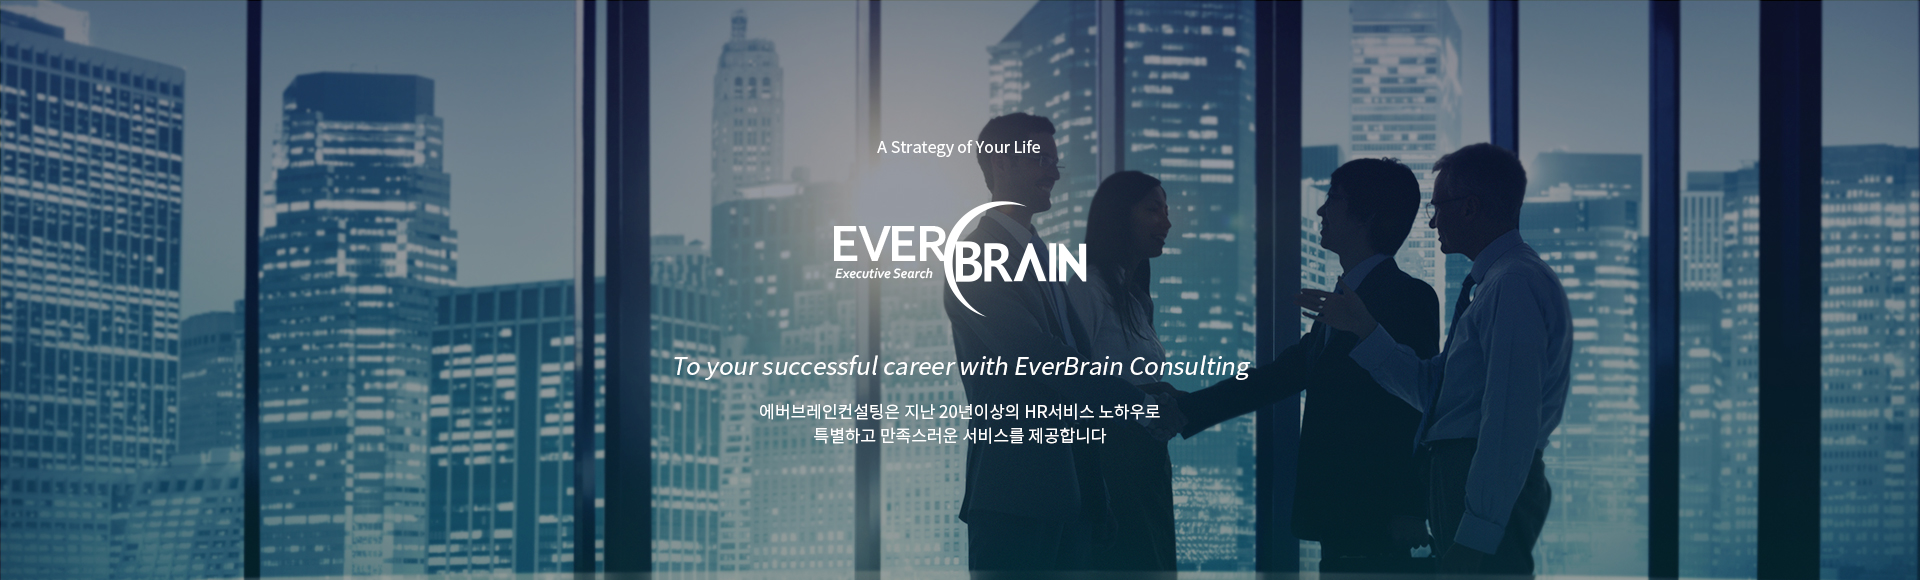 A Strategy of Your Life, EVERBRAIN. 극  20 HR Ͽ Ưϰ  񽺸 մϴ. To your successful career with EverBrain Consulting.